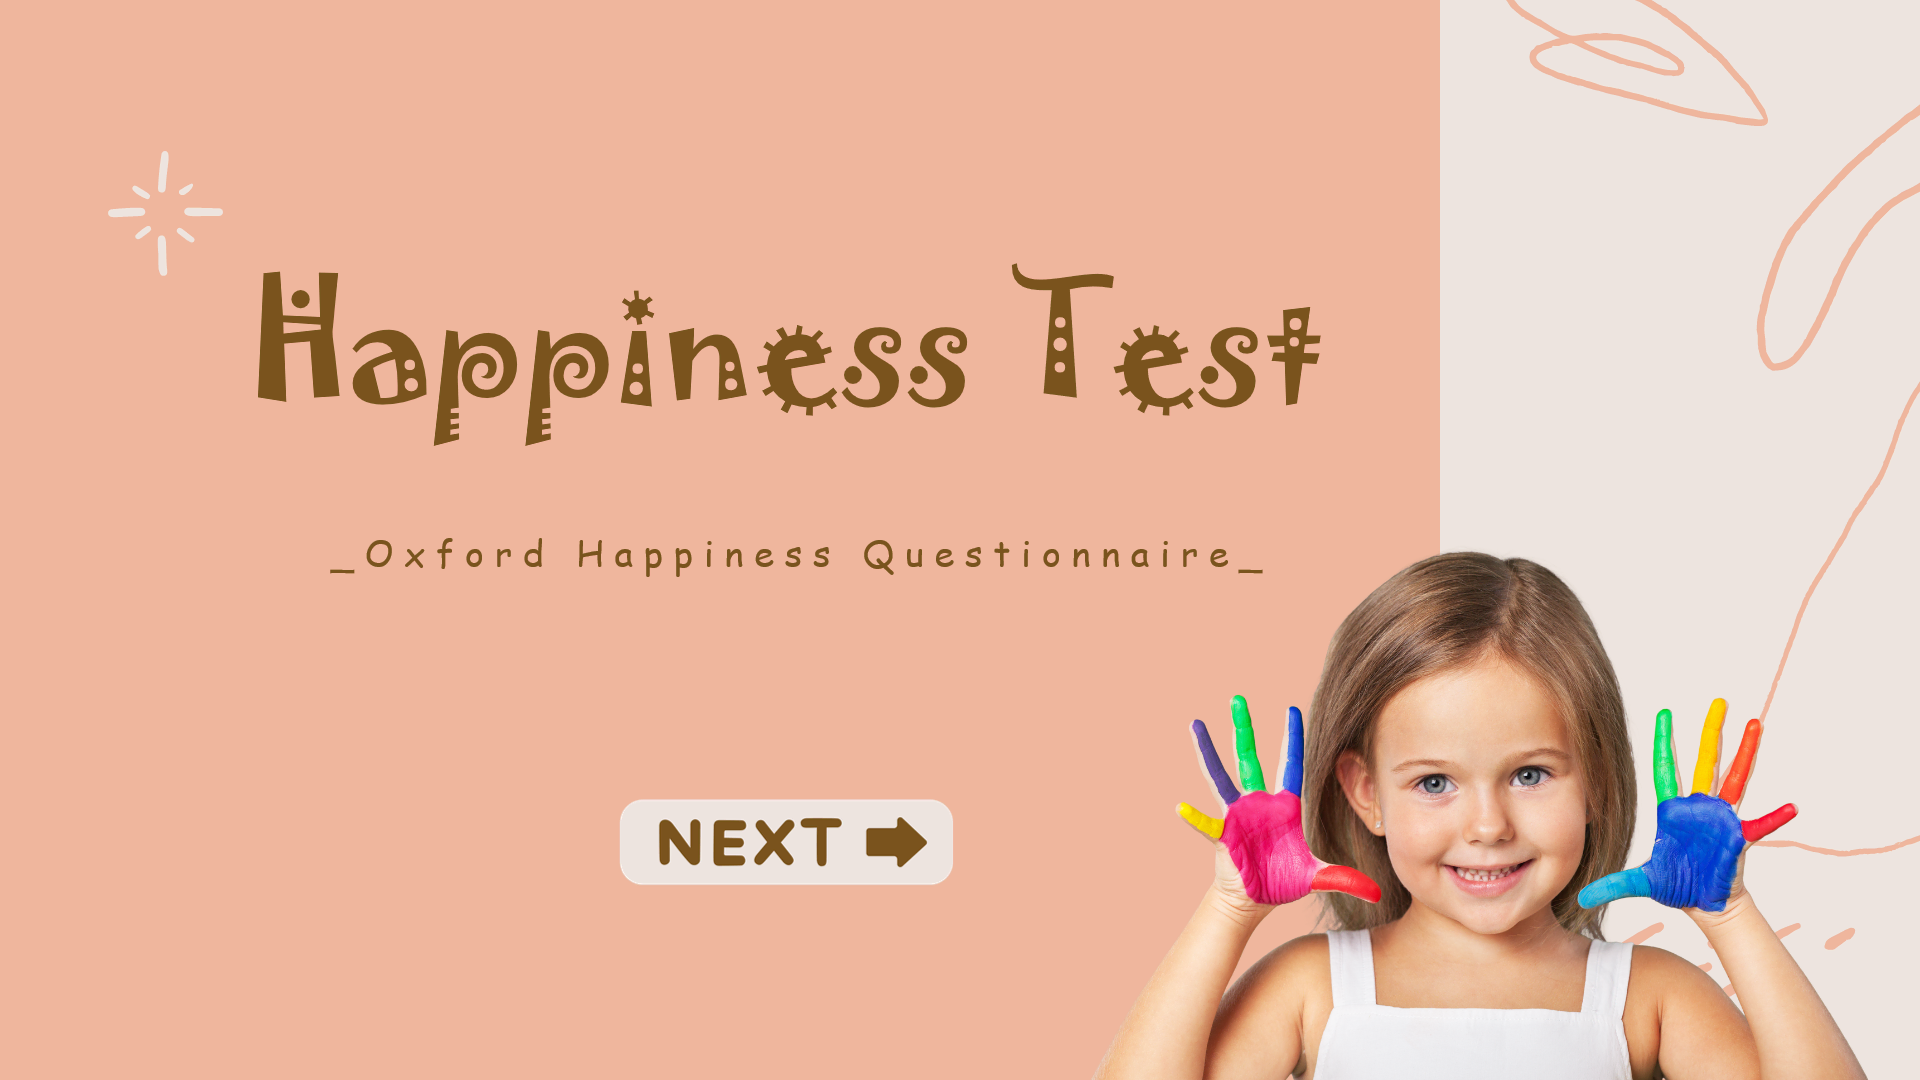 Welcome slide in Happiness test - Oxford Happiness Questionnaire